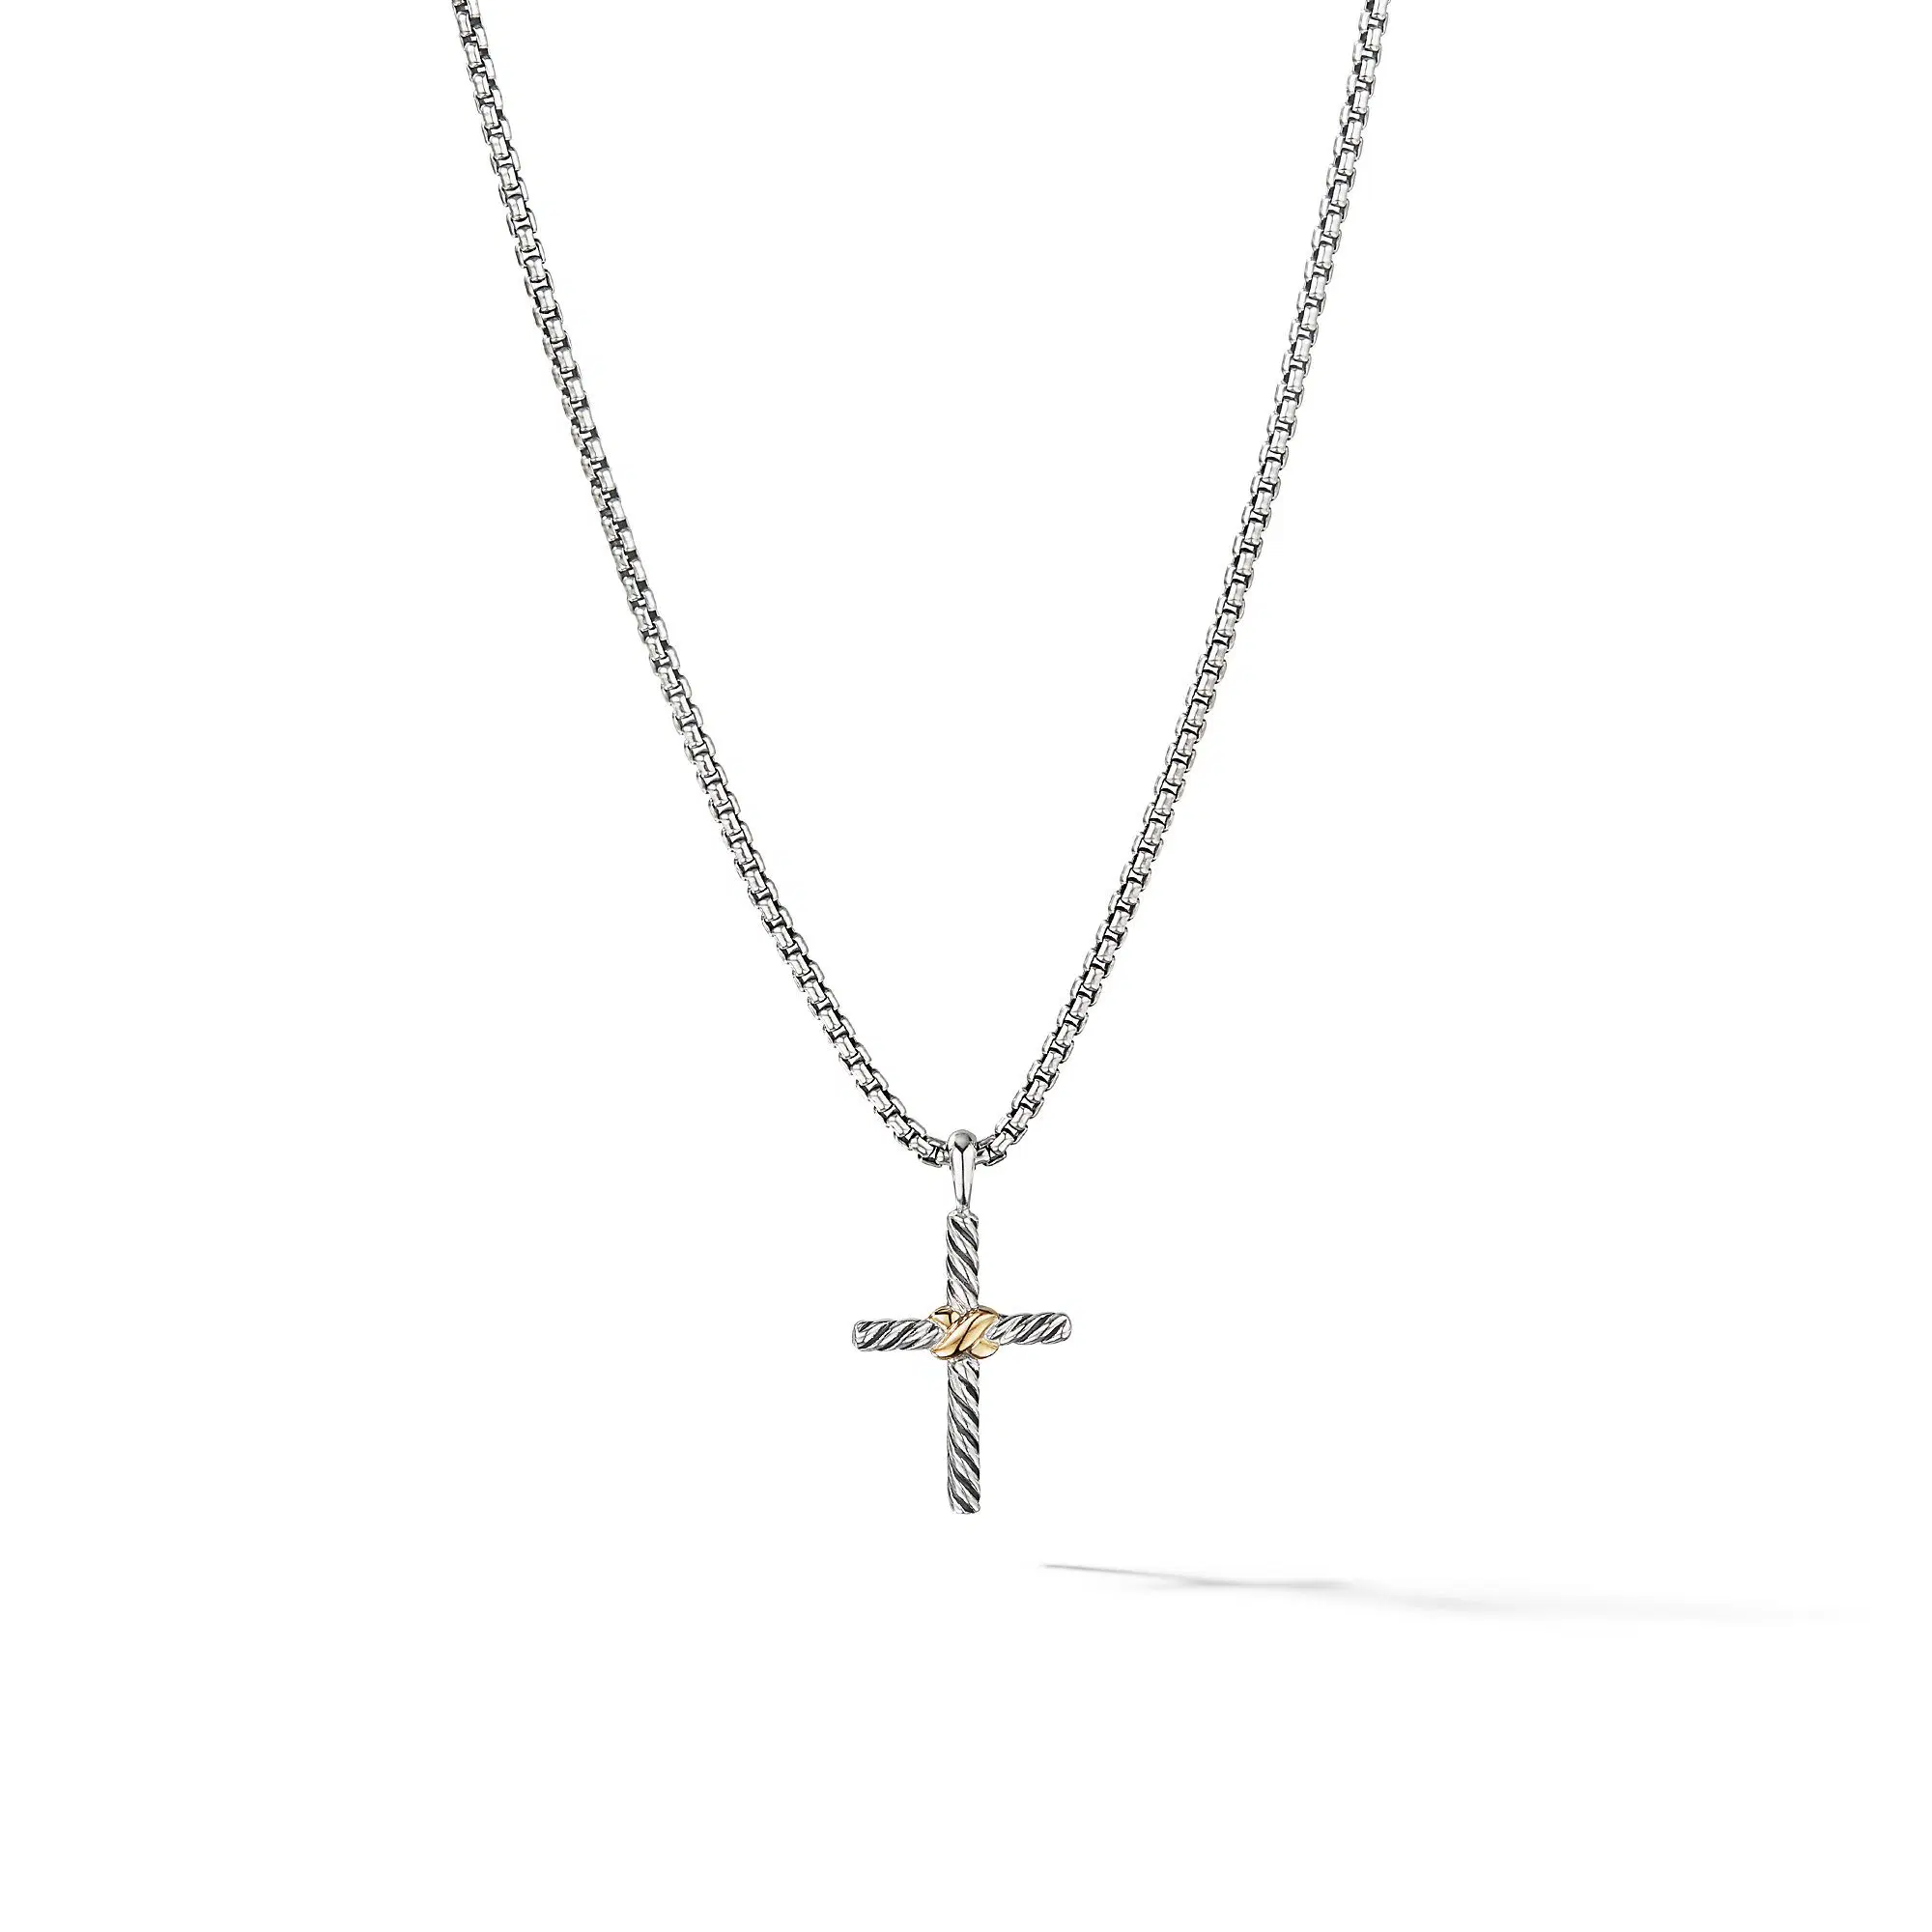 David Yurman Petite X Cross Necklace with 14K Gold, 16 Inches